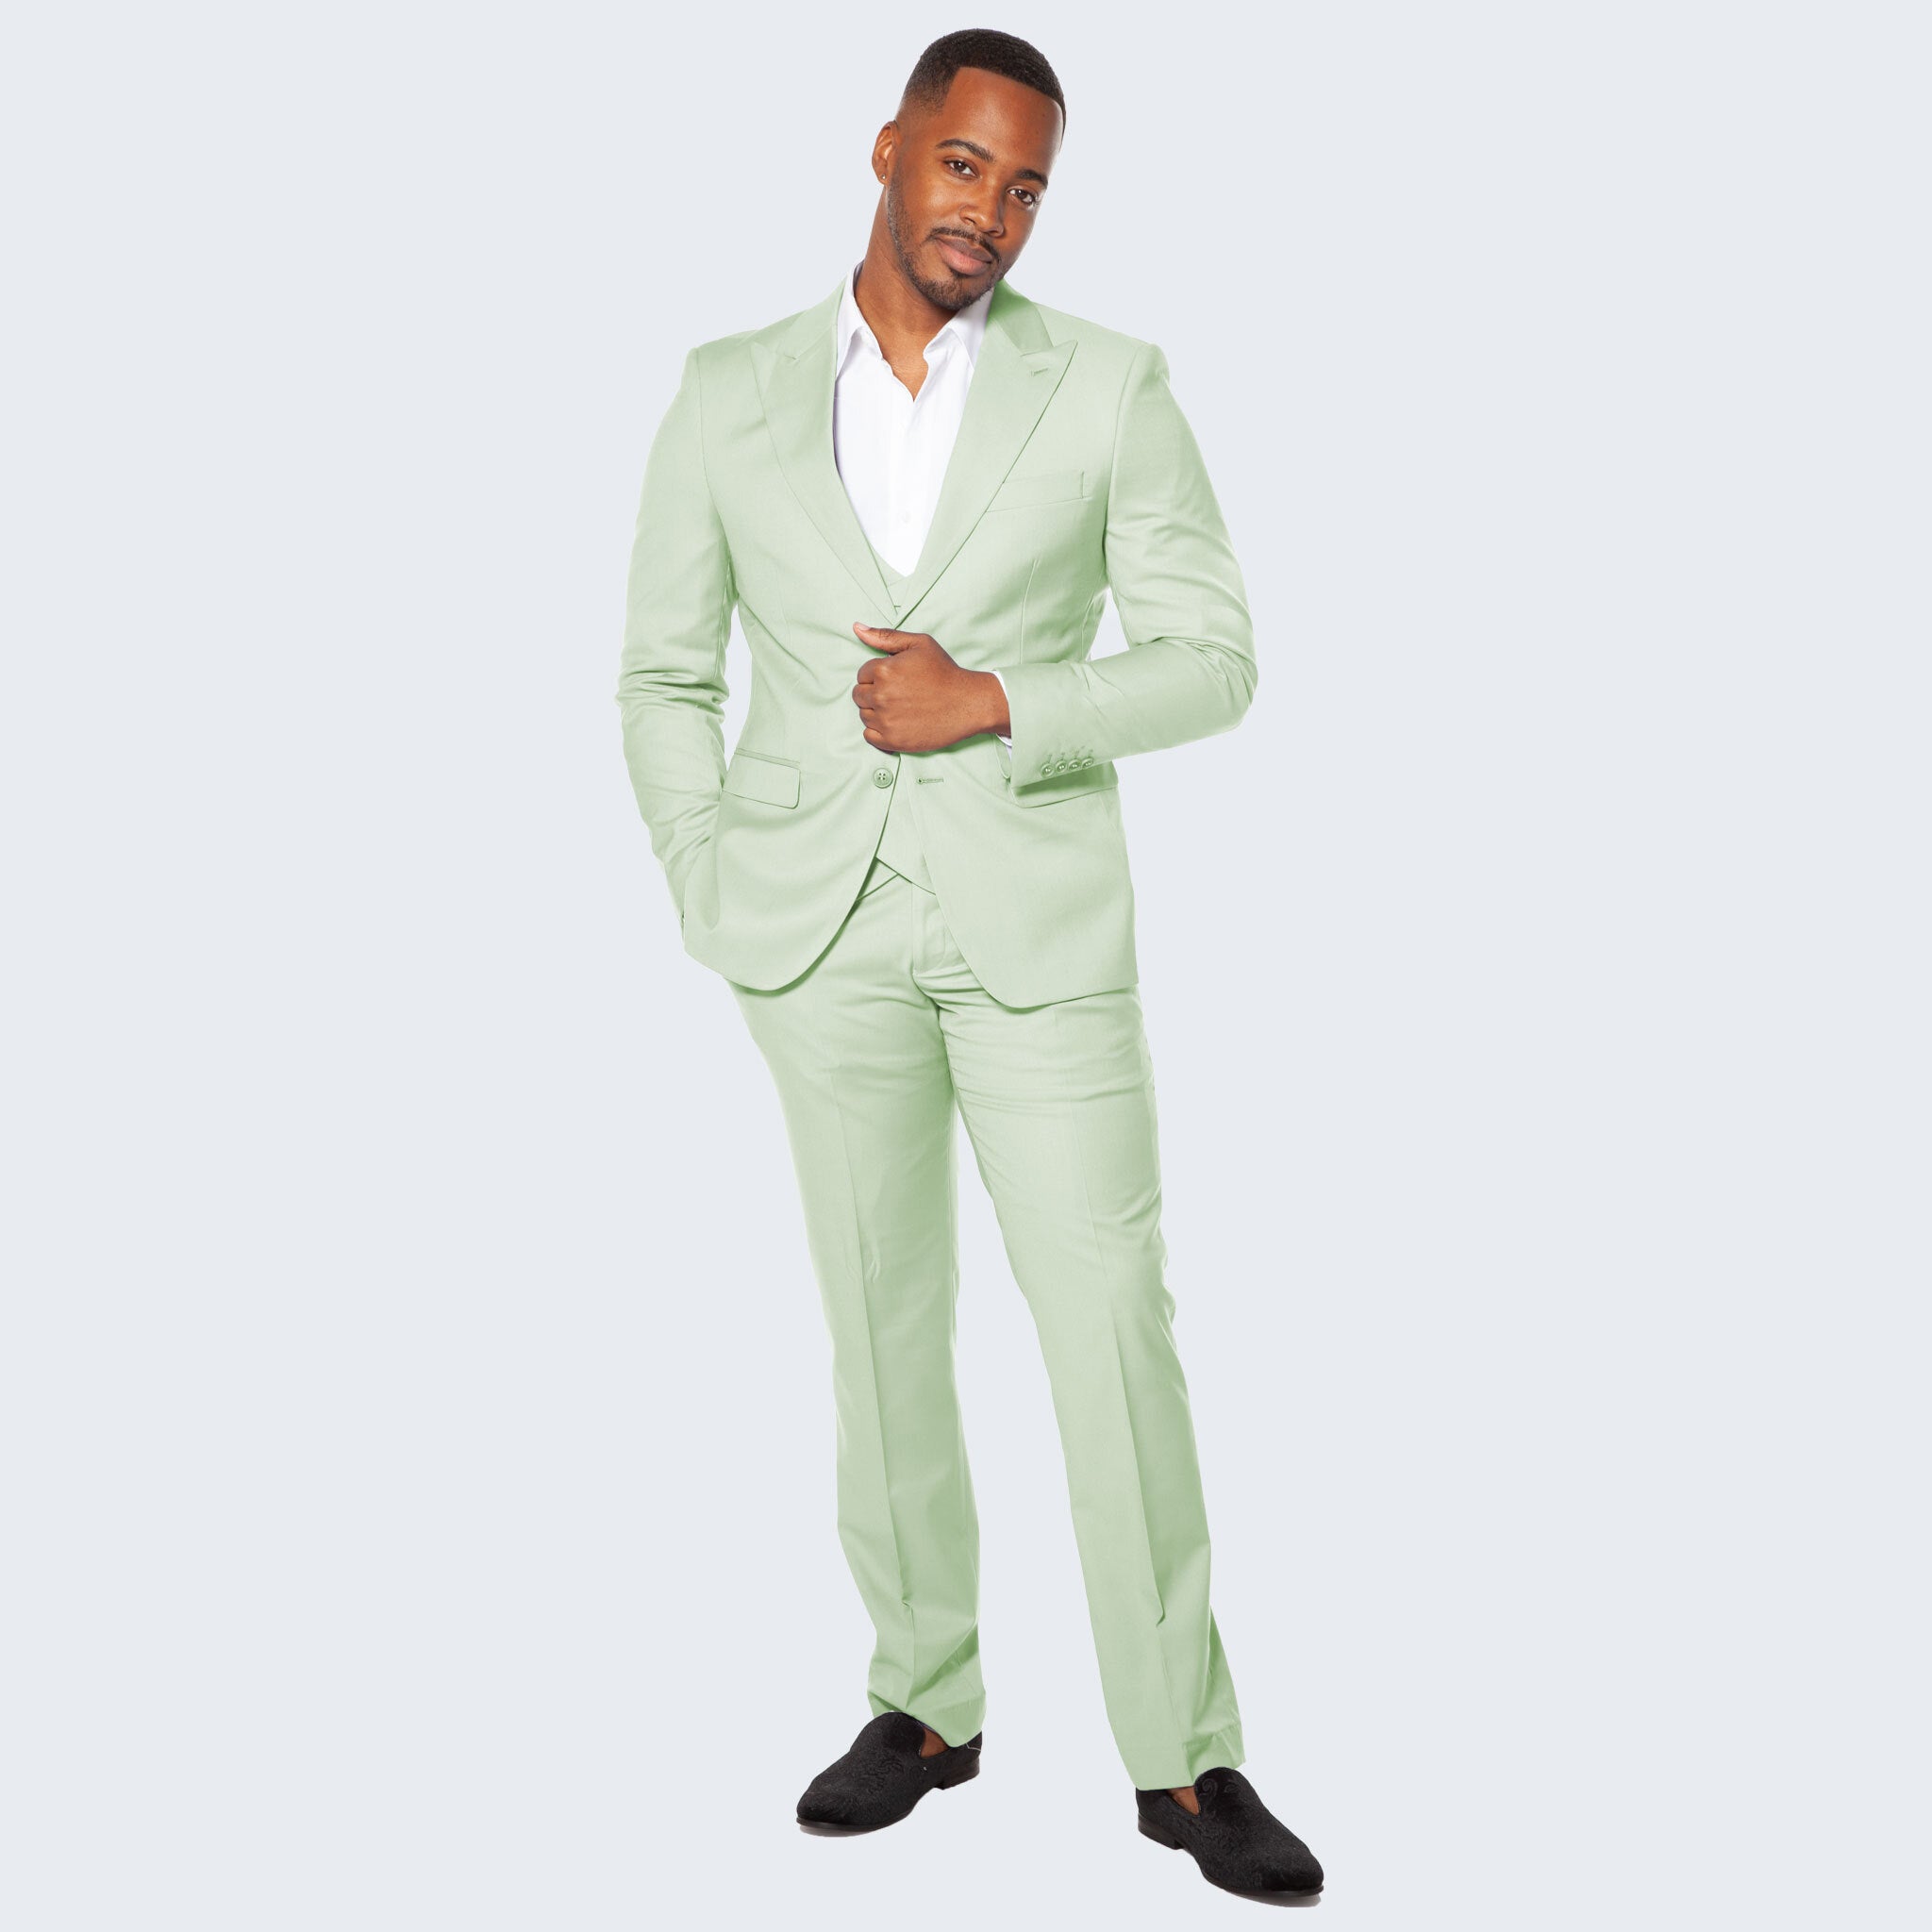 Man in Mint Green Suit · Free Stock Photo